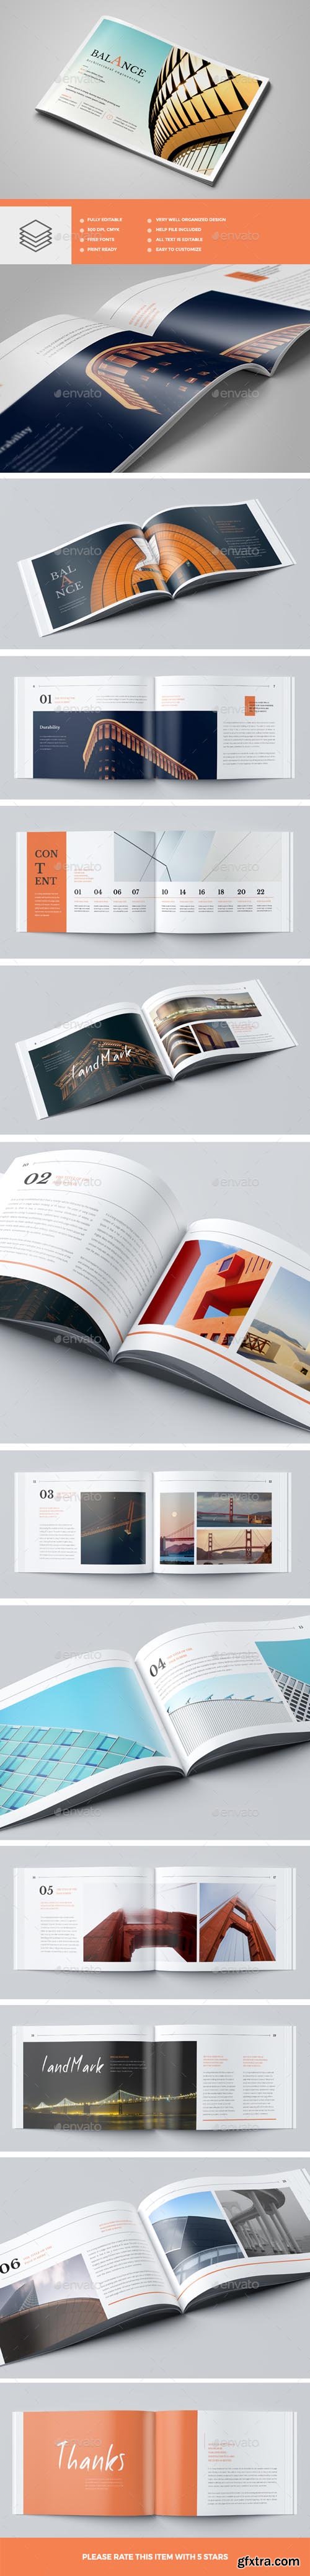 GR - Modern Architecture Brochure 24 Pages A5 20447529